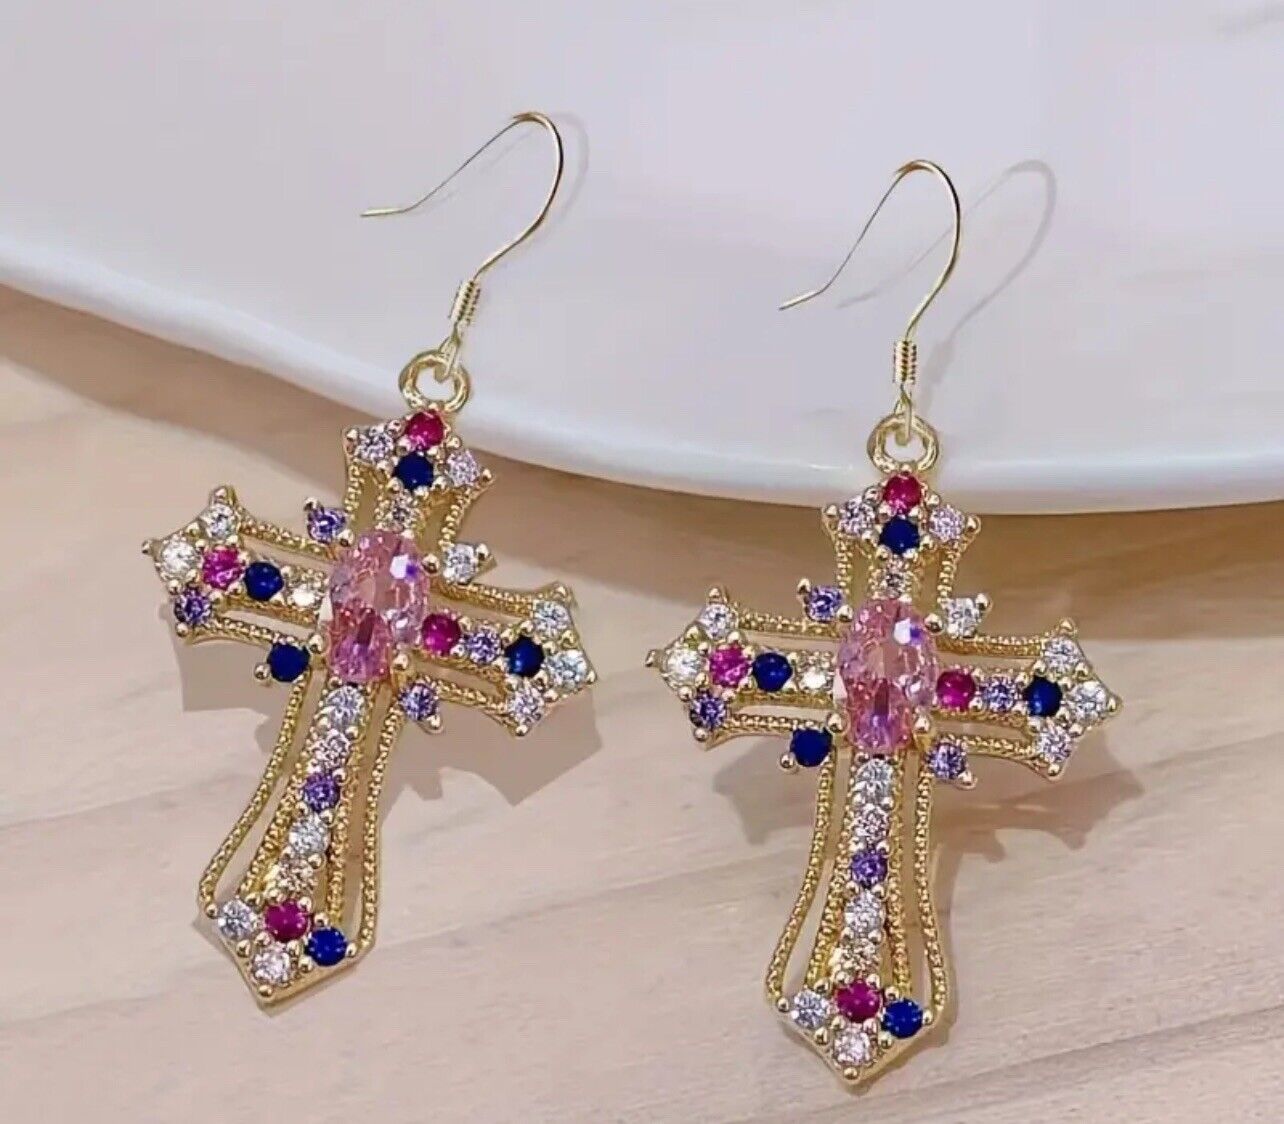 18 K Gold plated cross earrings with cubic zirconia stones , for Women